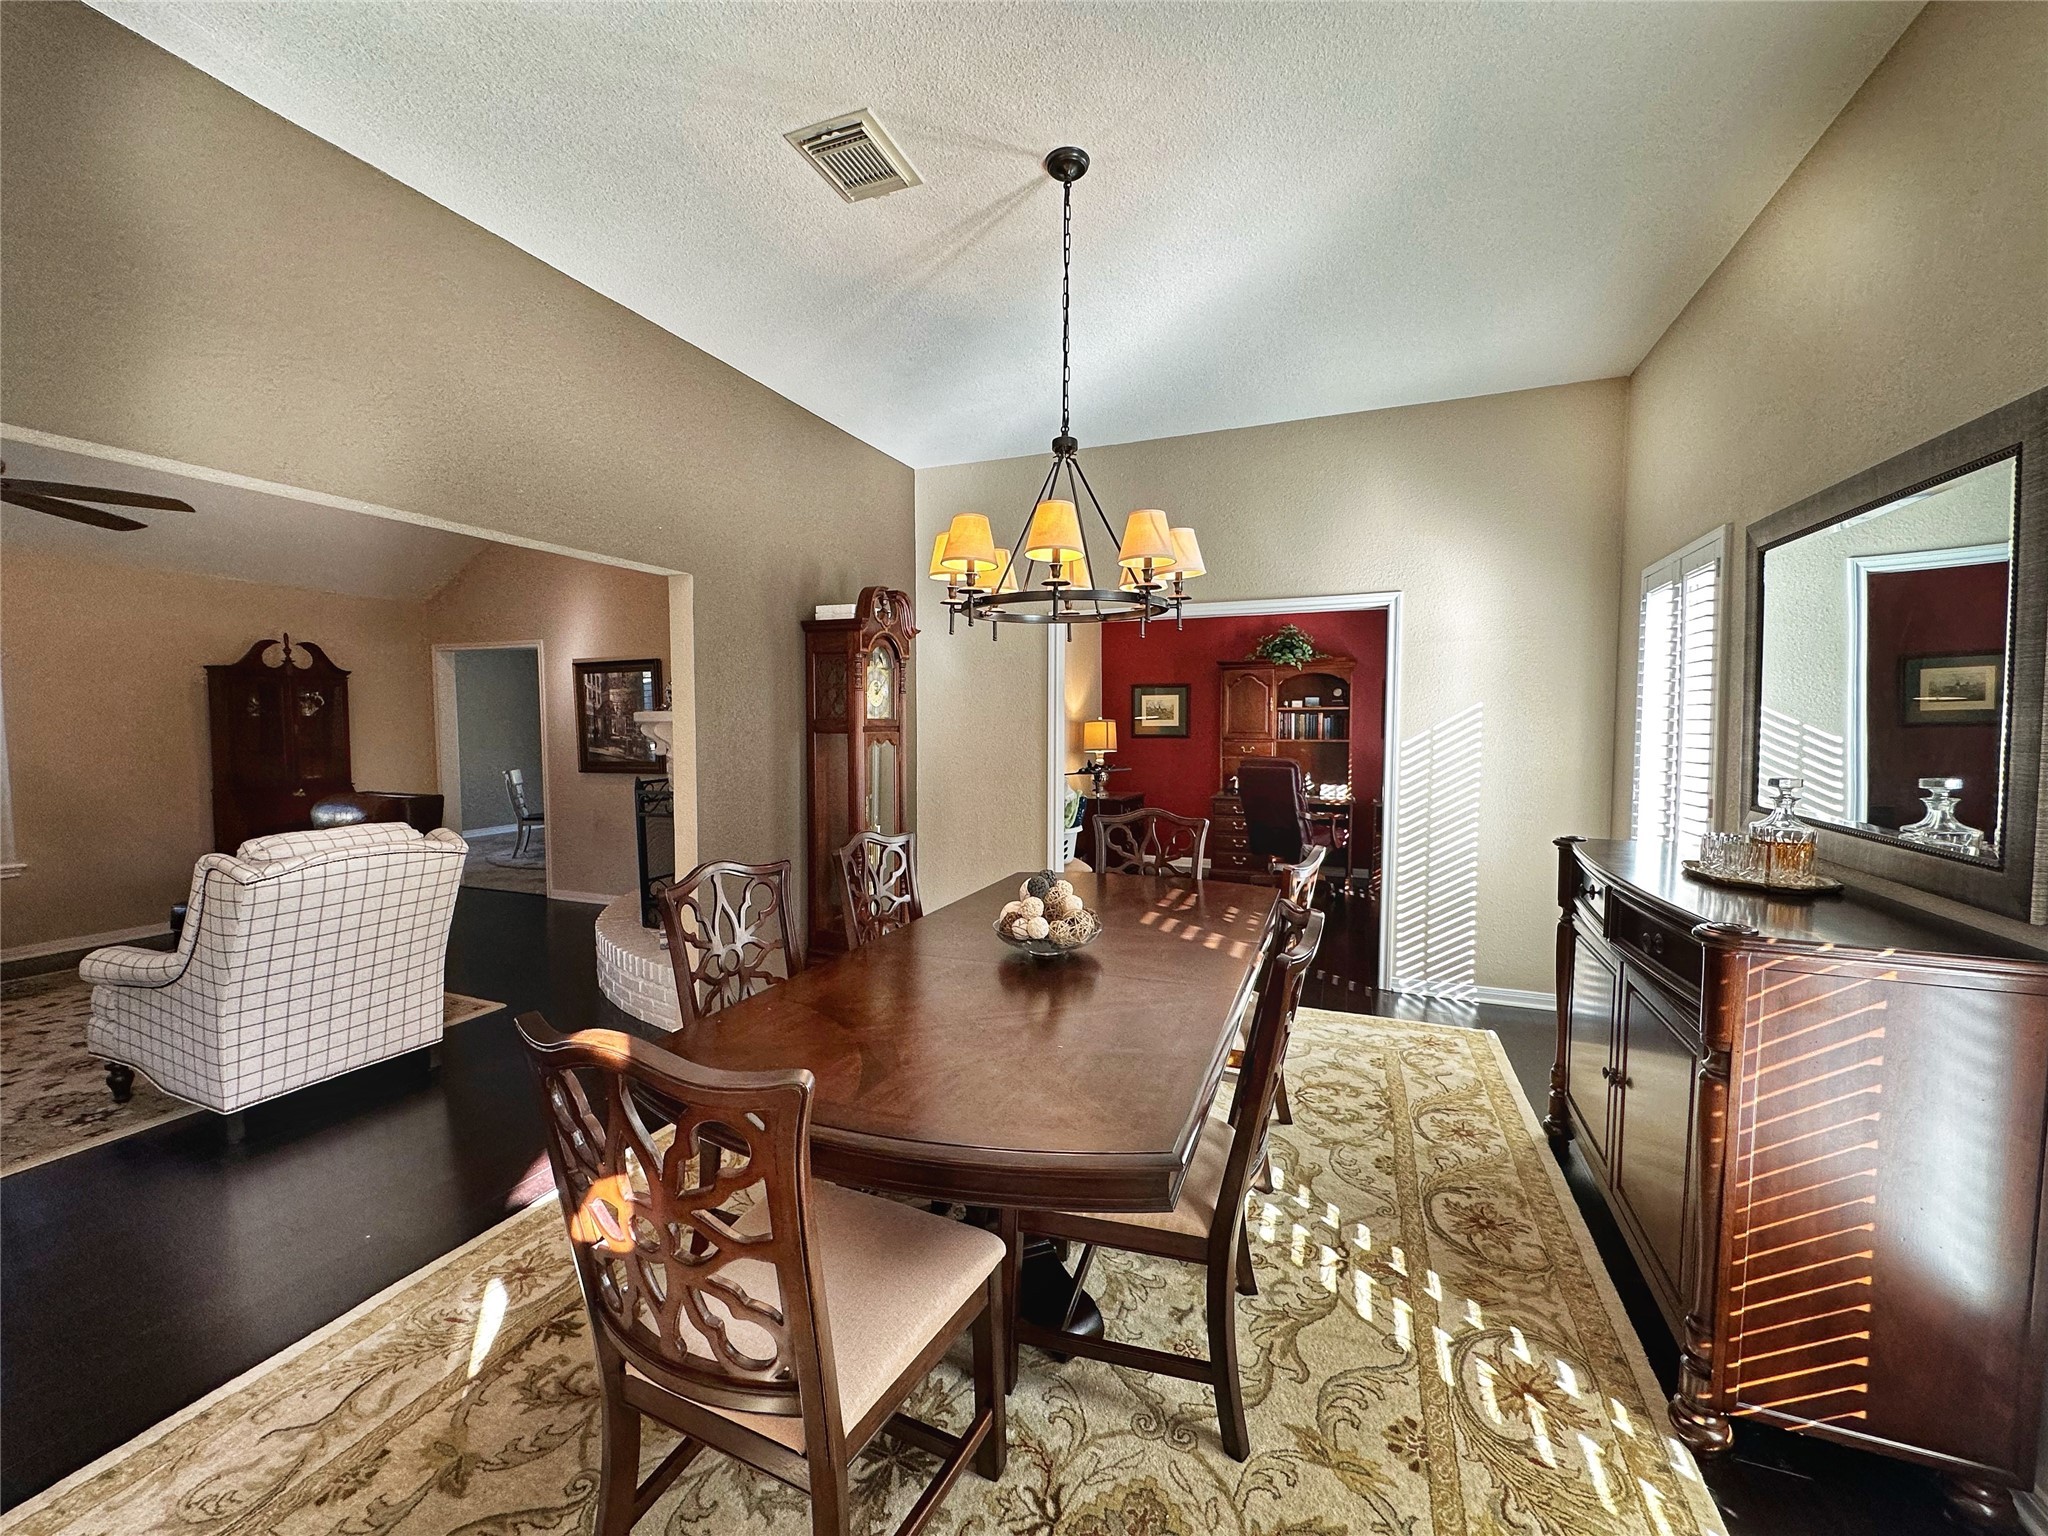 Make your new memories in this open, formal dining area.